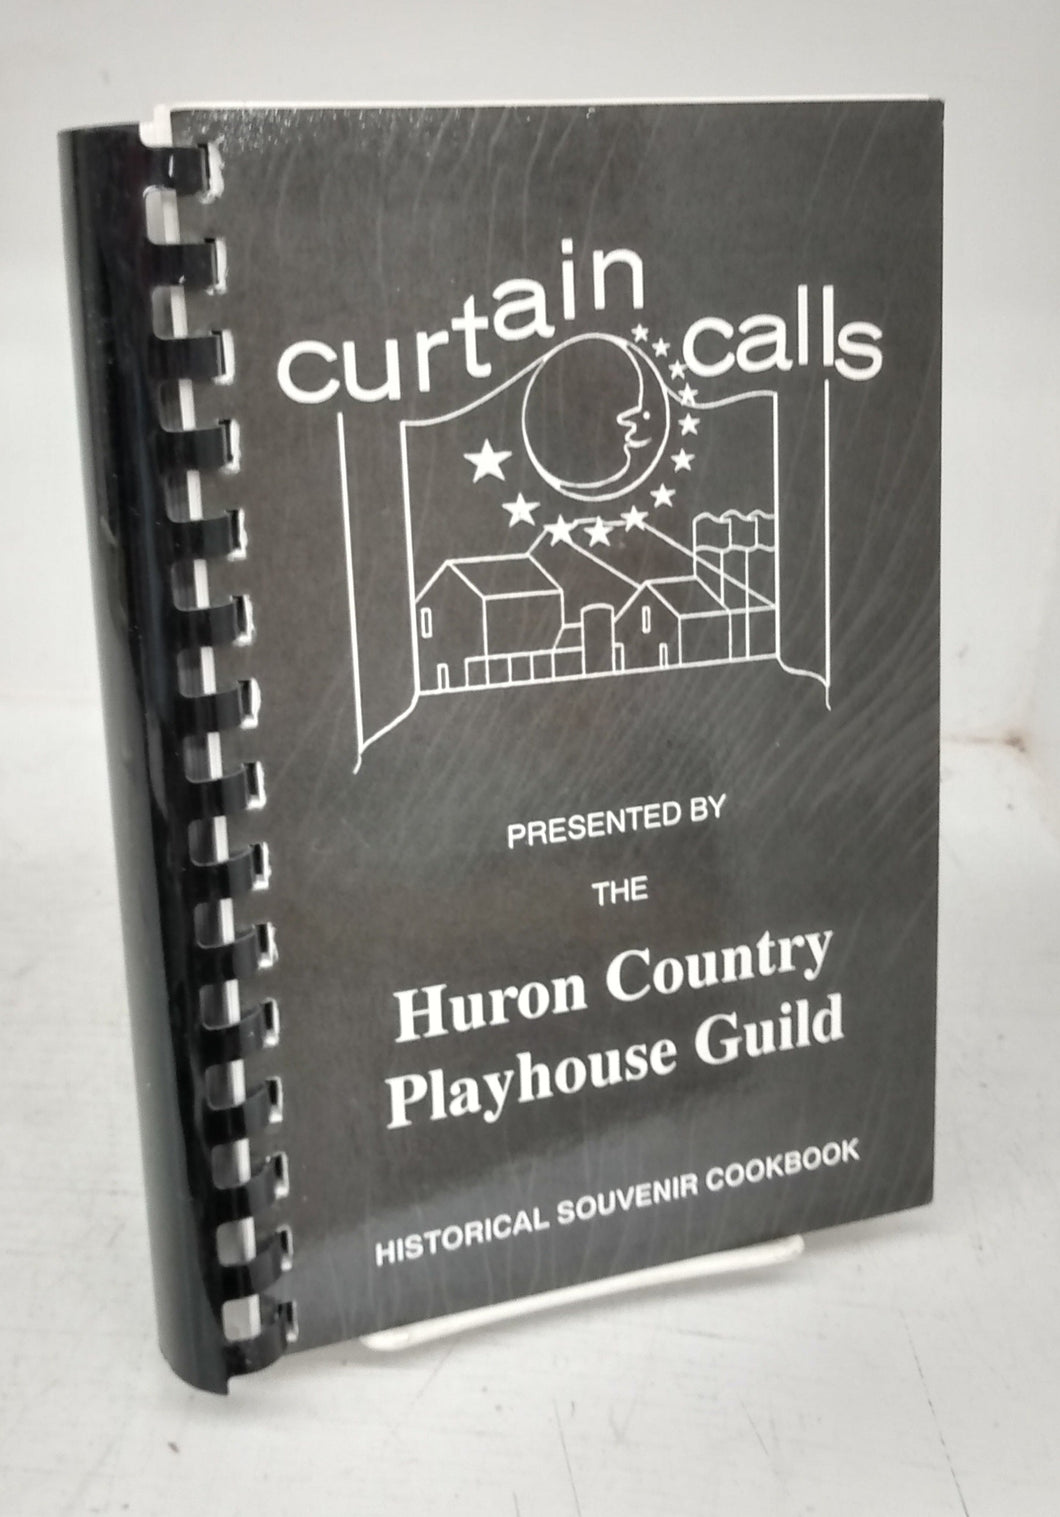 Curtain Calls Presented by The Huron Country Playhouse Guild: Historical Souvenir Cookbook